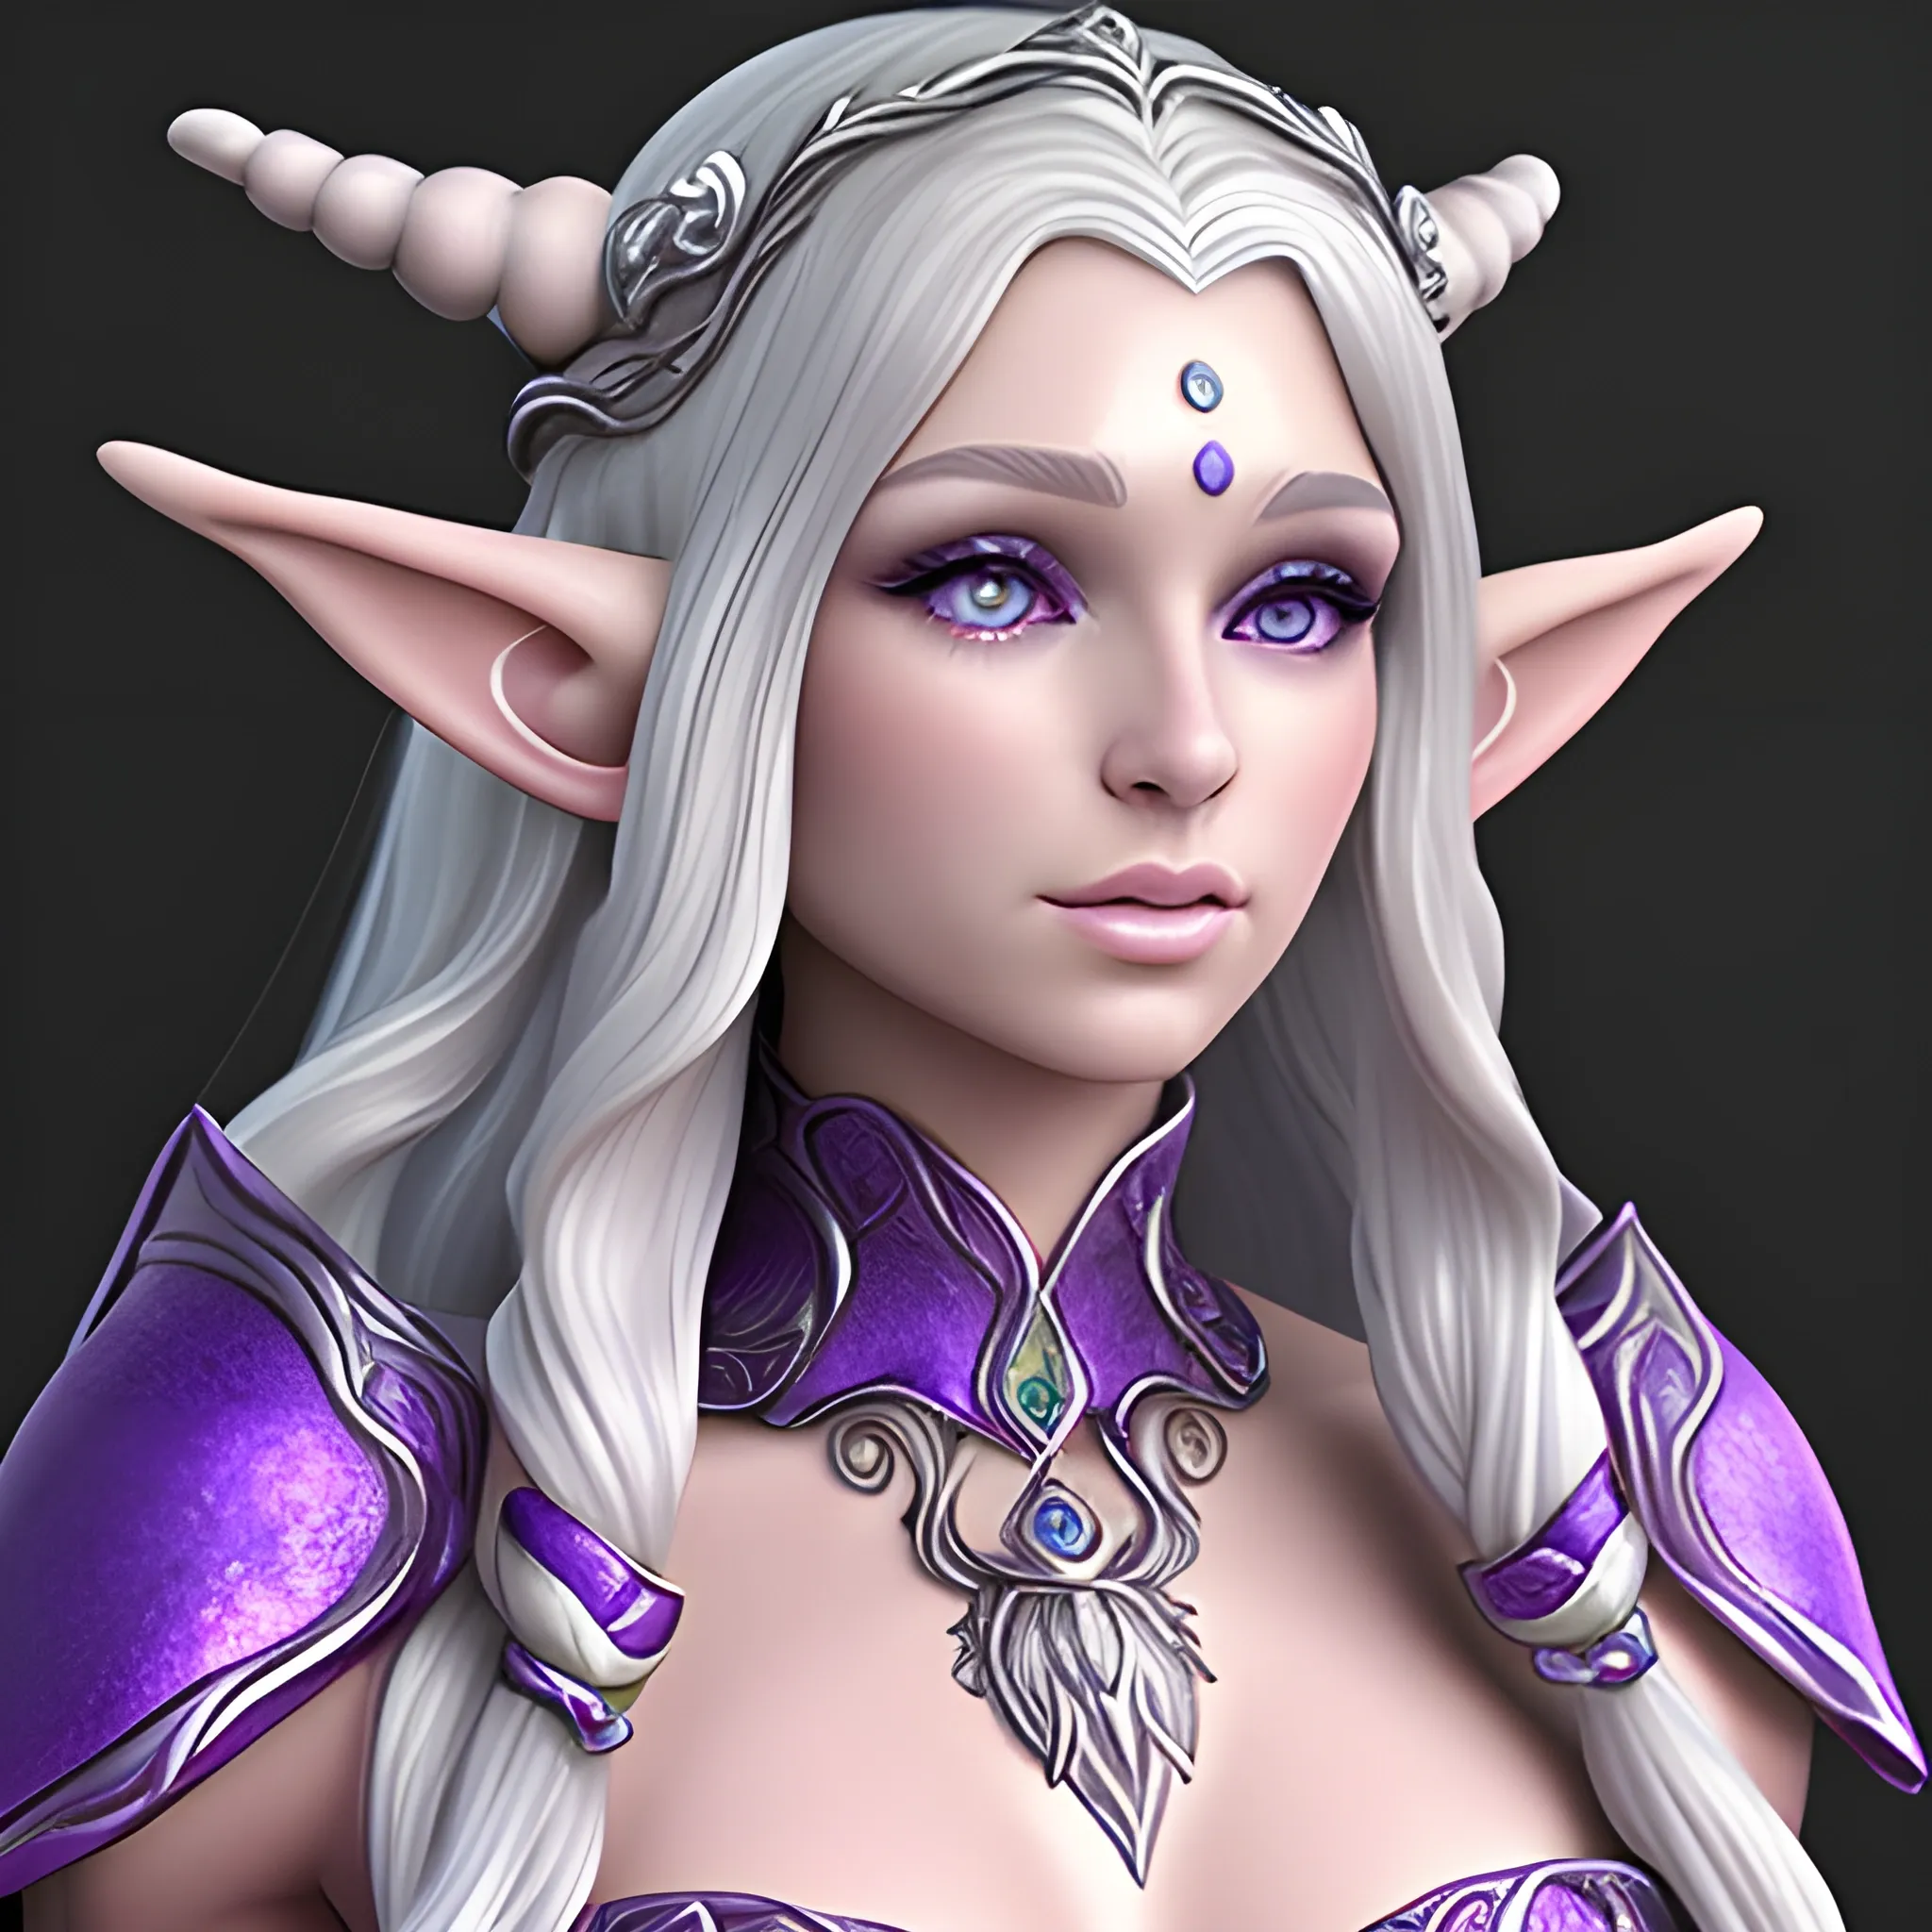 female elf with long curling silver hair and purple eyes. Jeweled ears and body. Dewy skin, soft features, queen, princess